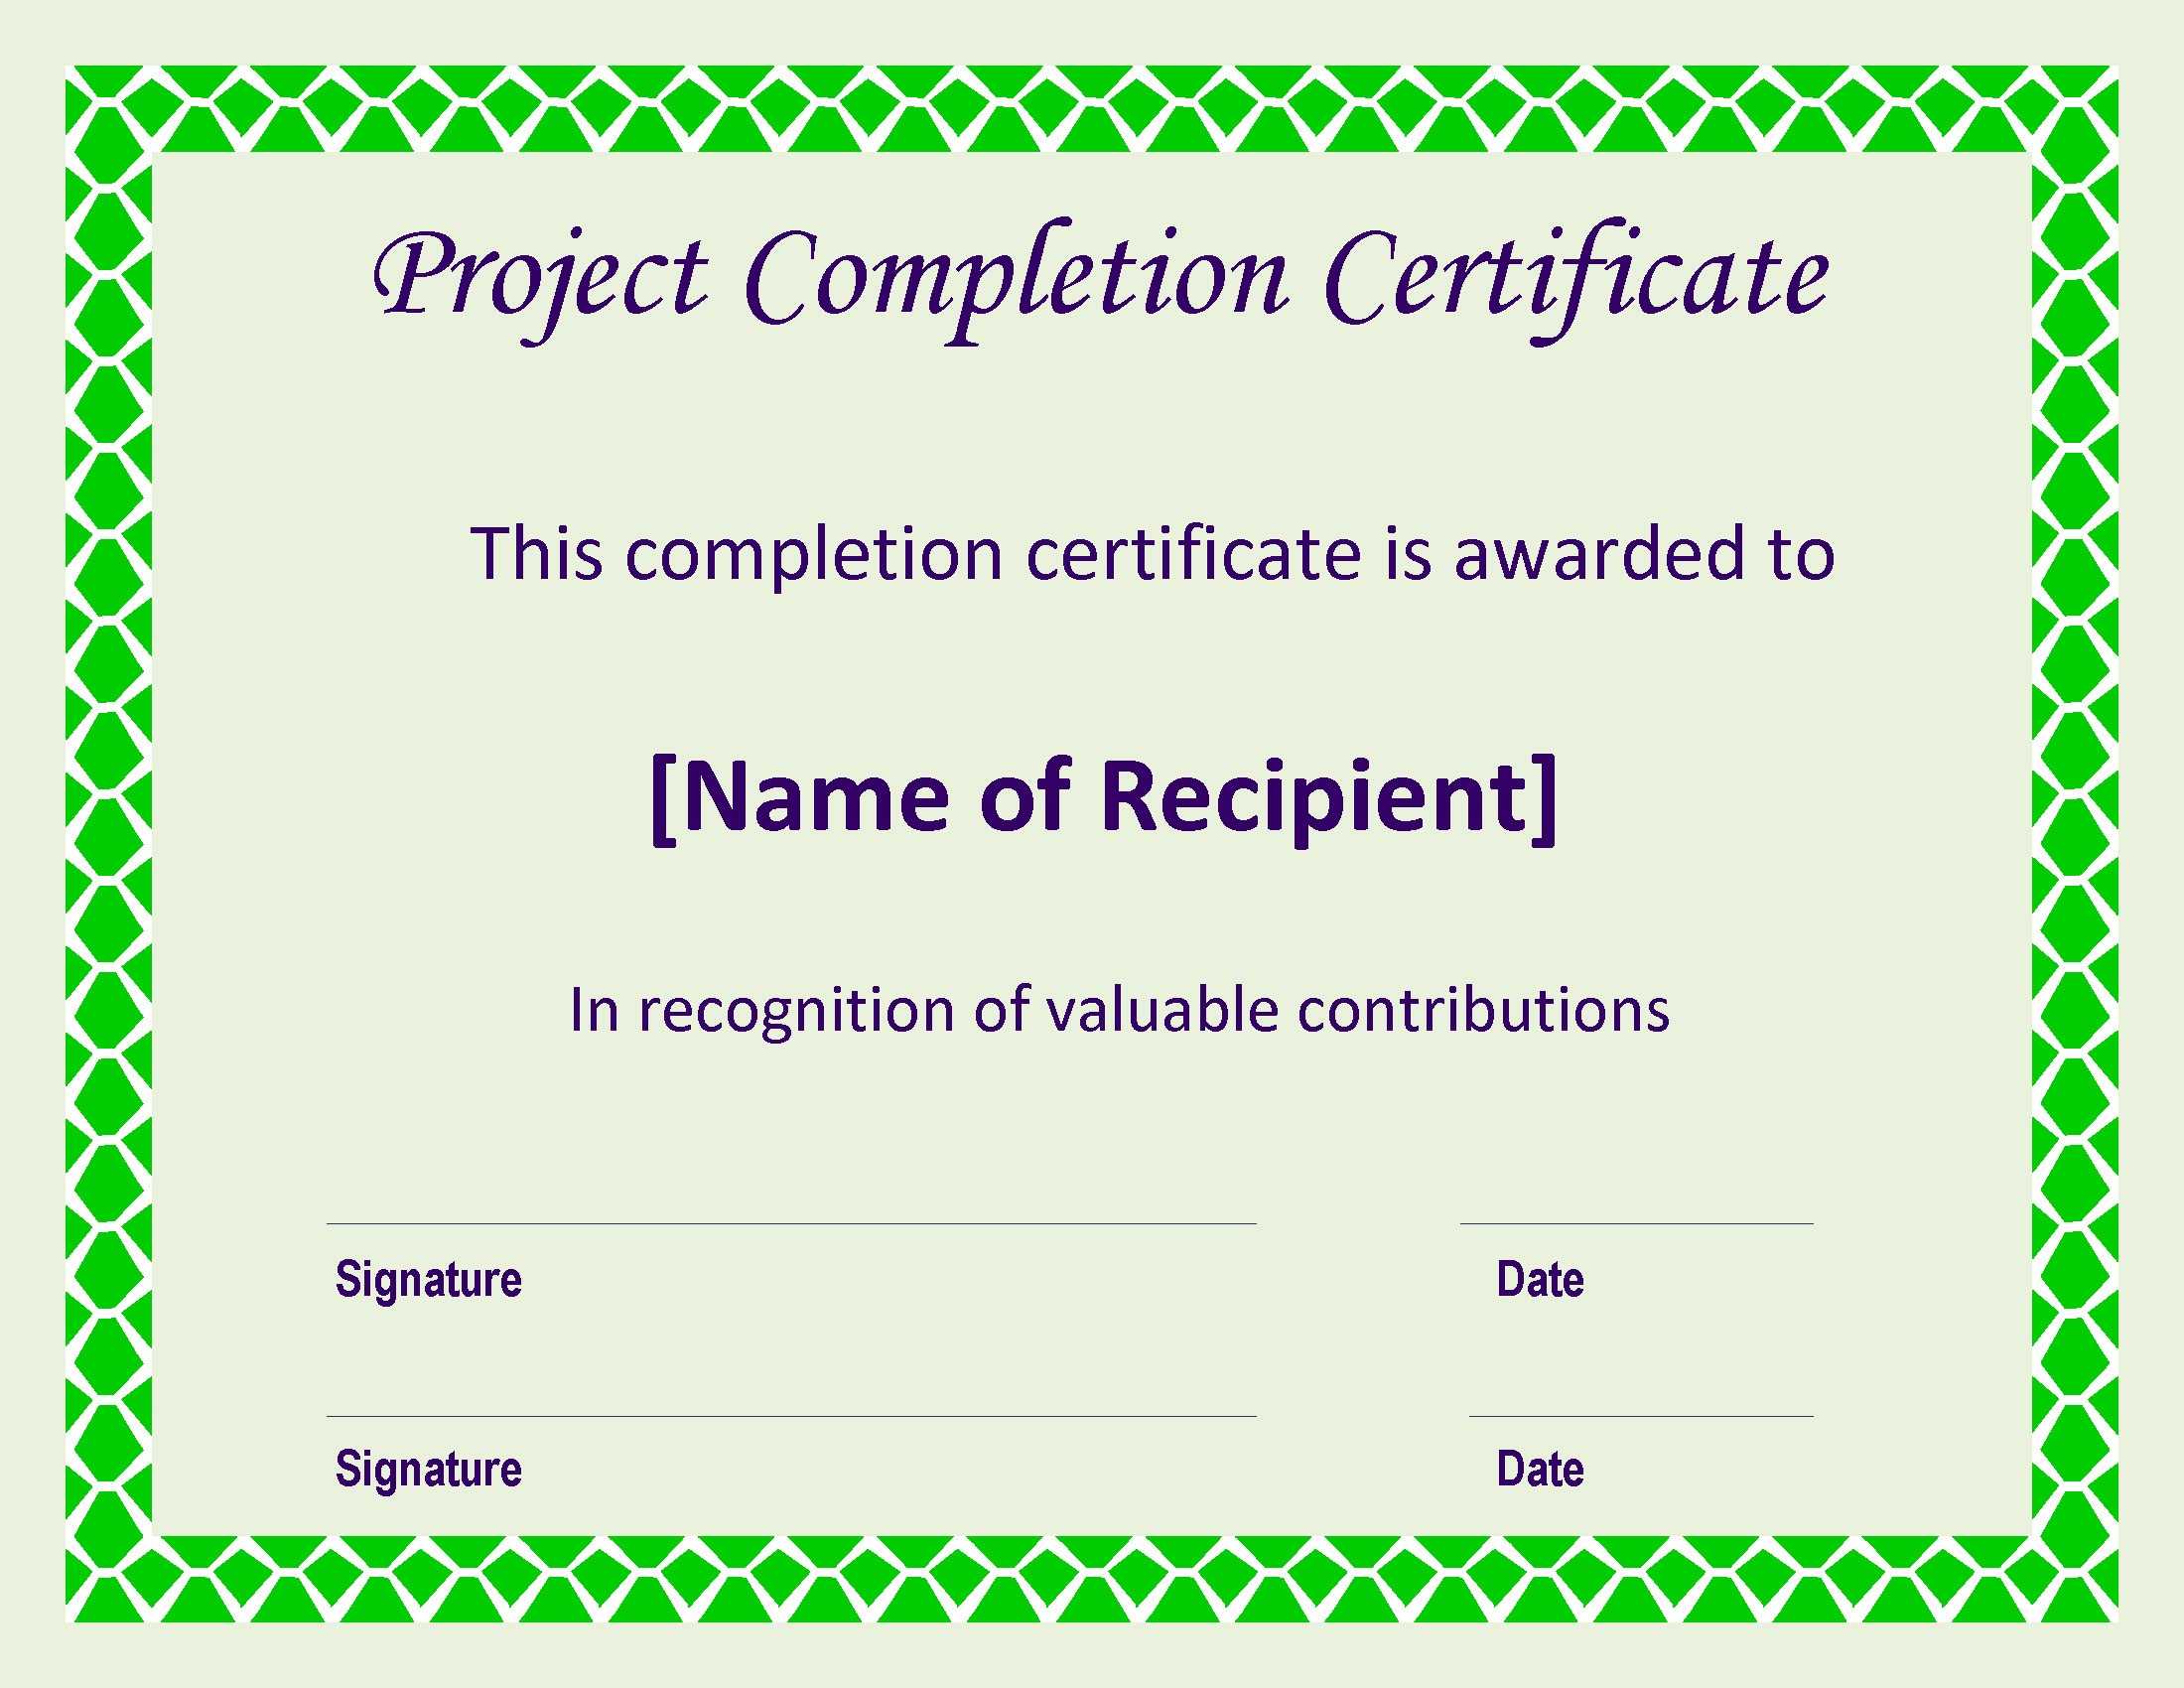 Certificate Sample For Project – Calep.midnightpig.co Intended For Certificate Template For Project Completion